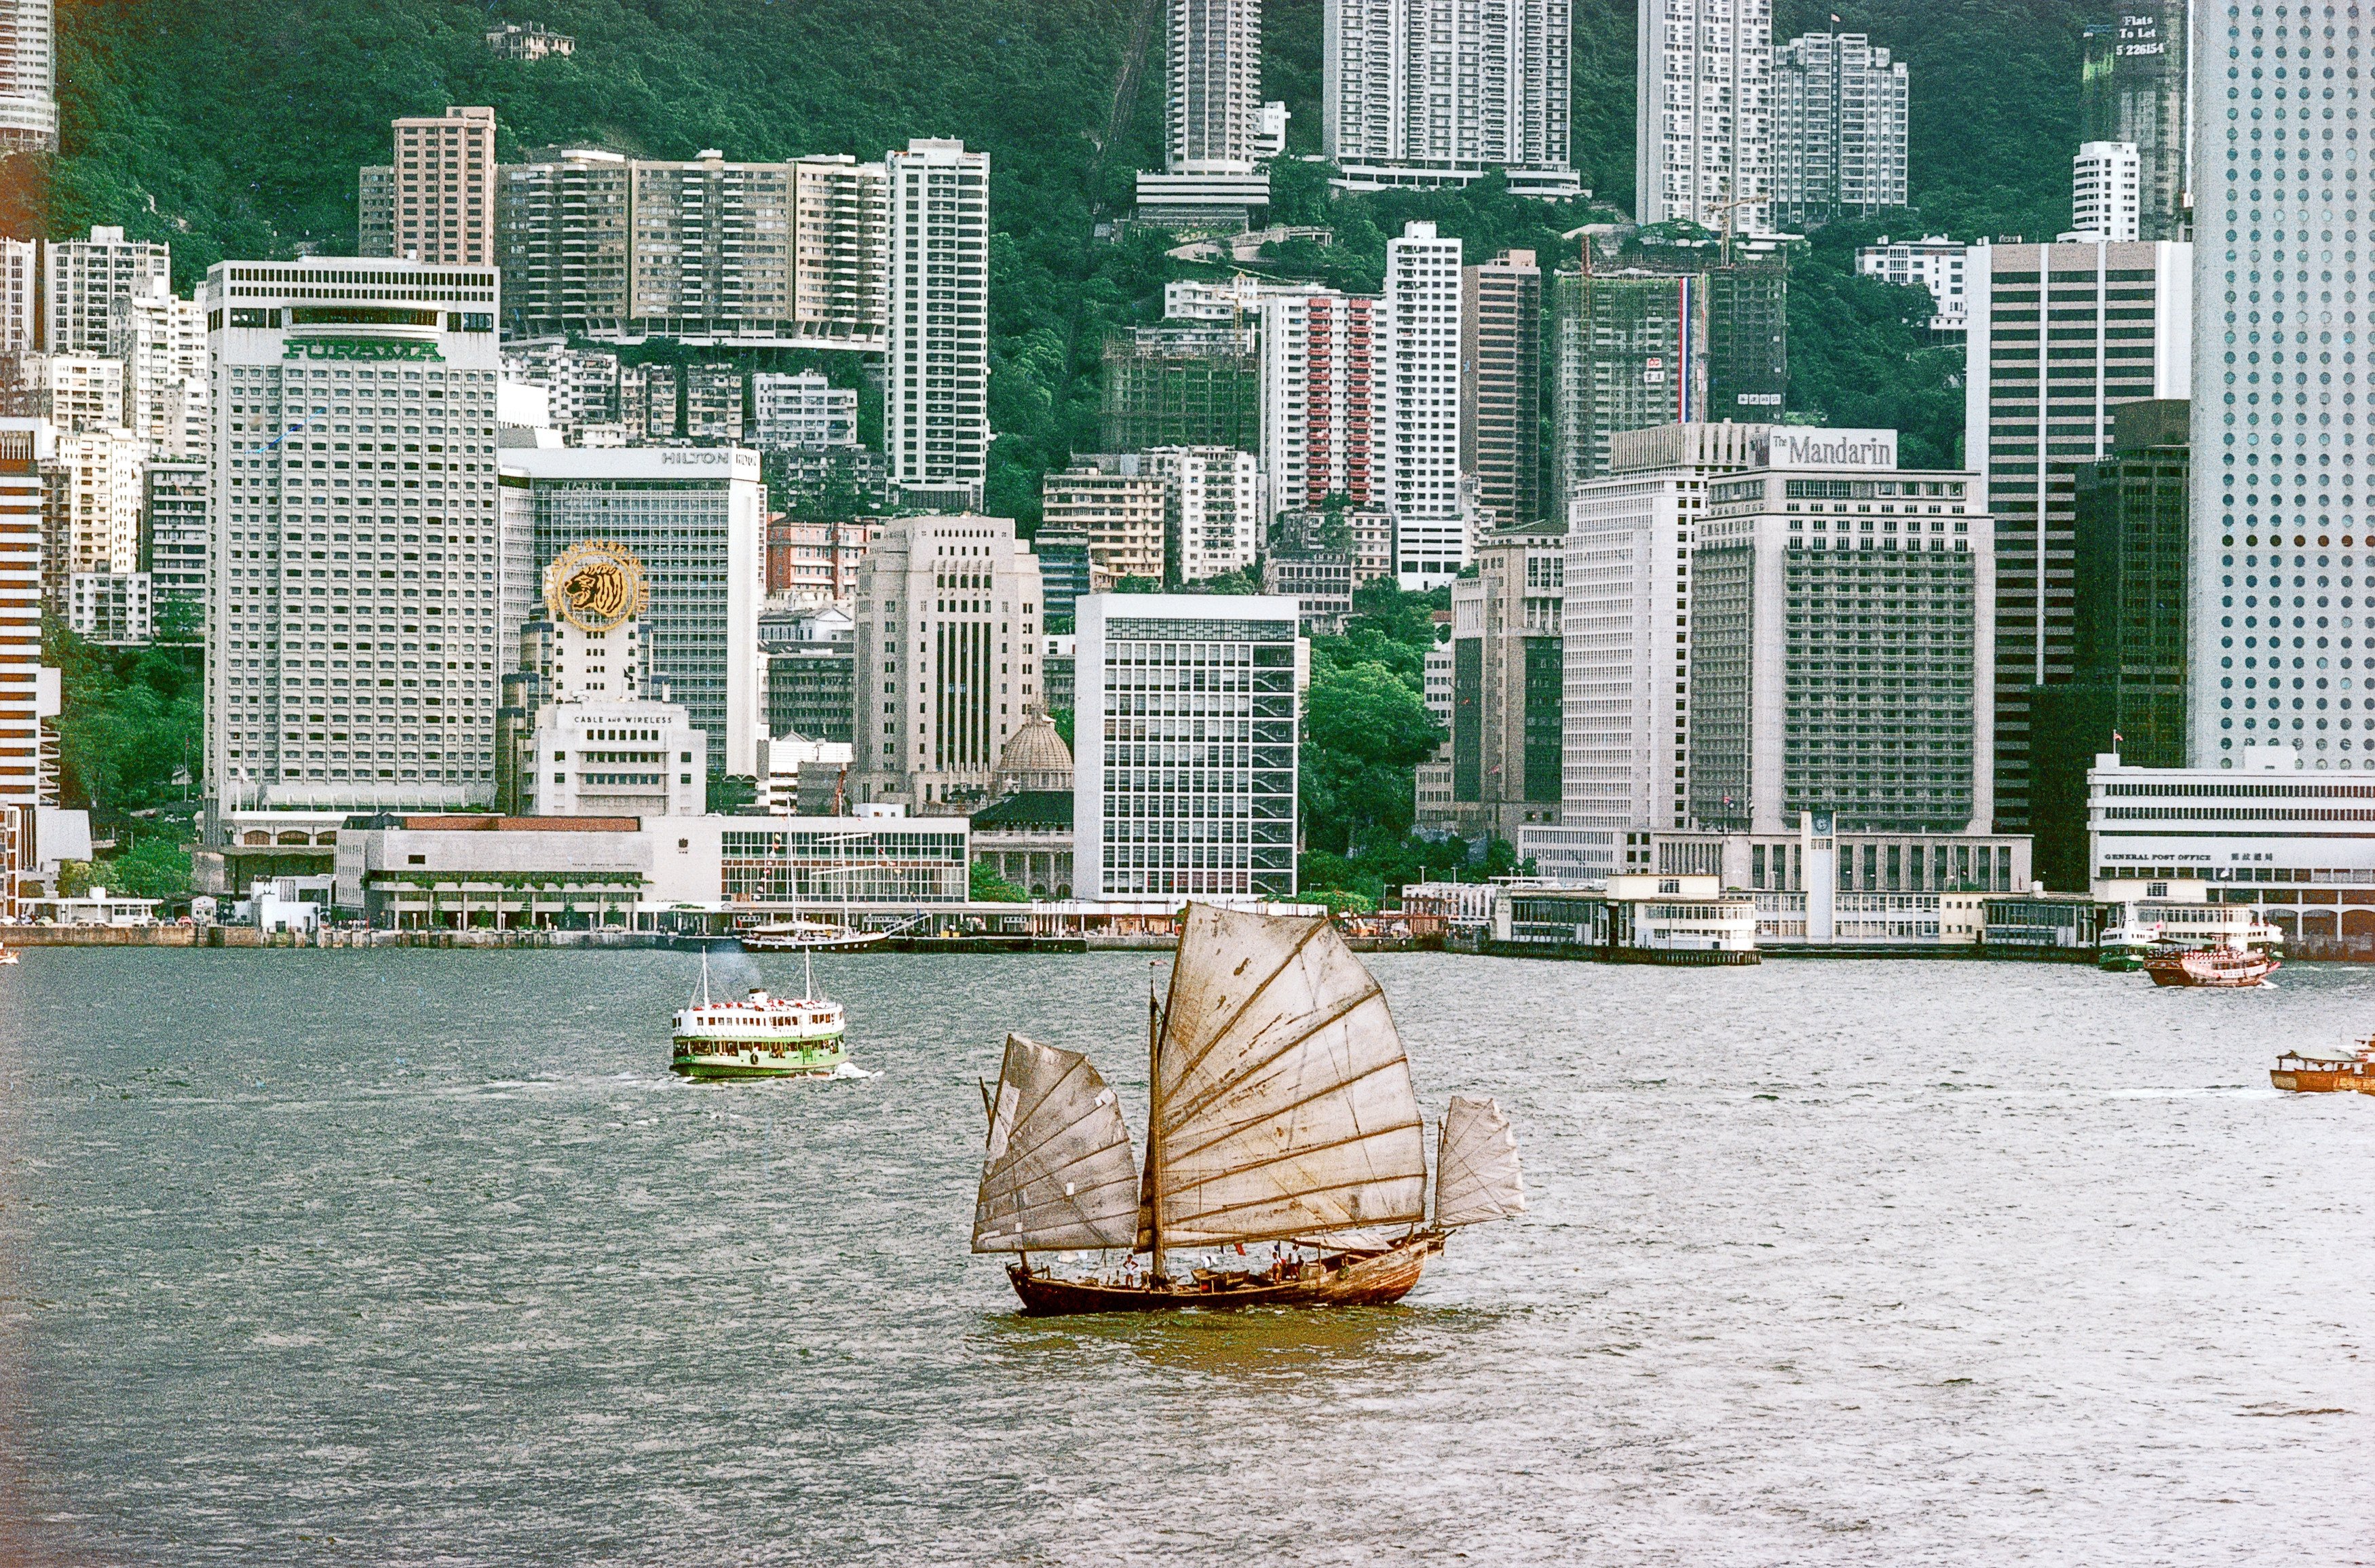 A lone junk plies Victoria Harbour in 1982,  by which time the fleets of junks that once plied its waters were a thing of the past. The Hong Kong Tourism Board adopted a junk as a symbol of the city with great success, but it long ago ceased representing reality.